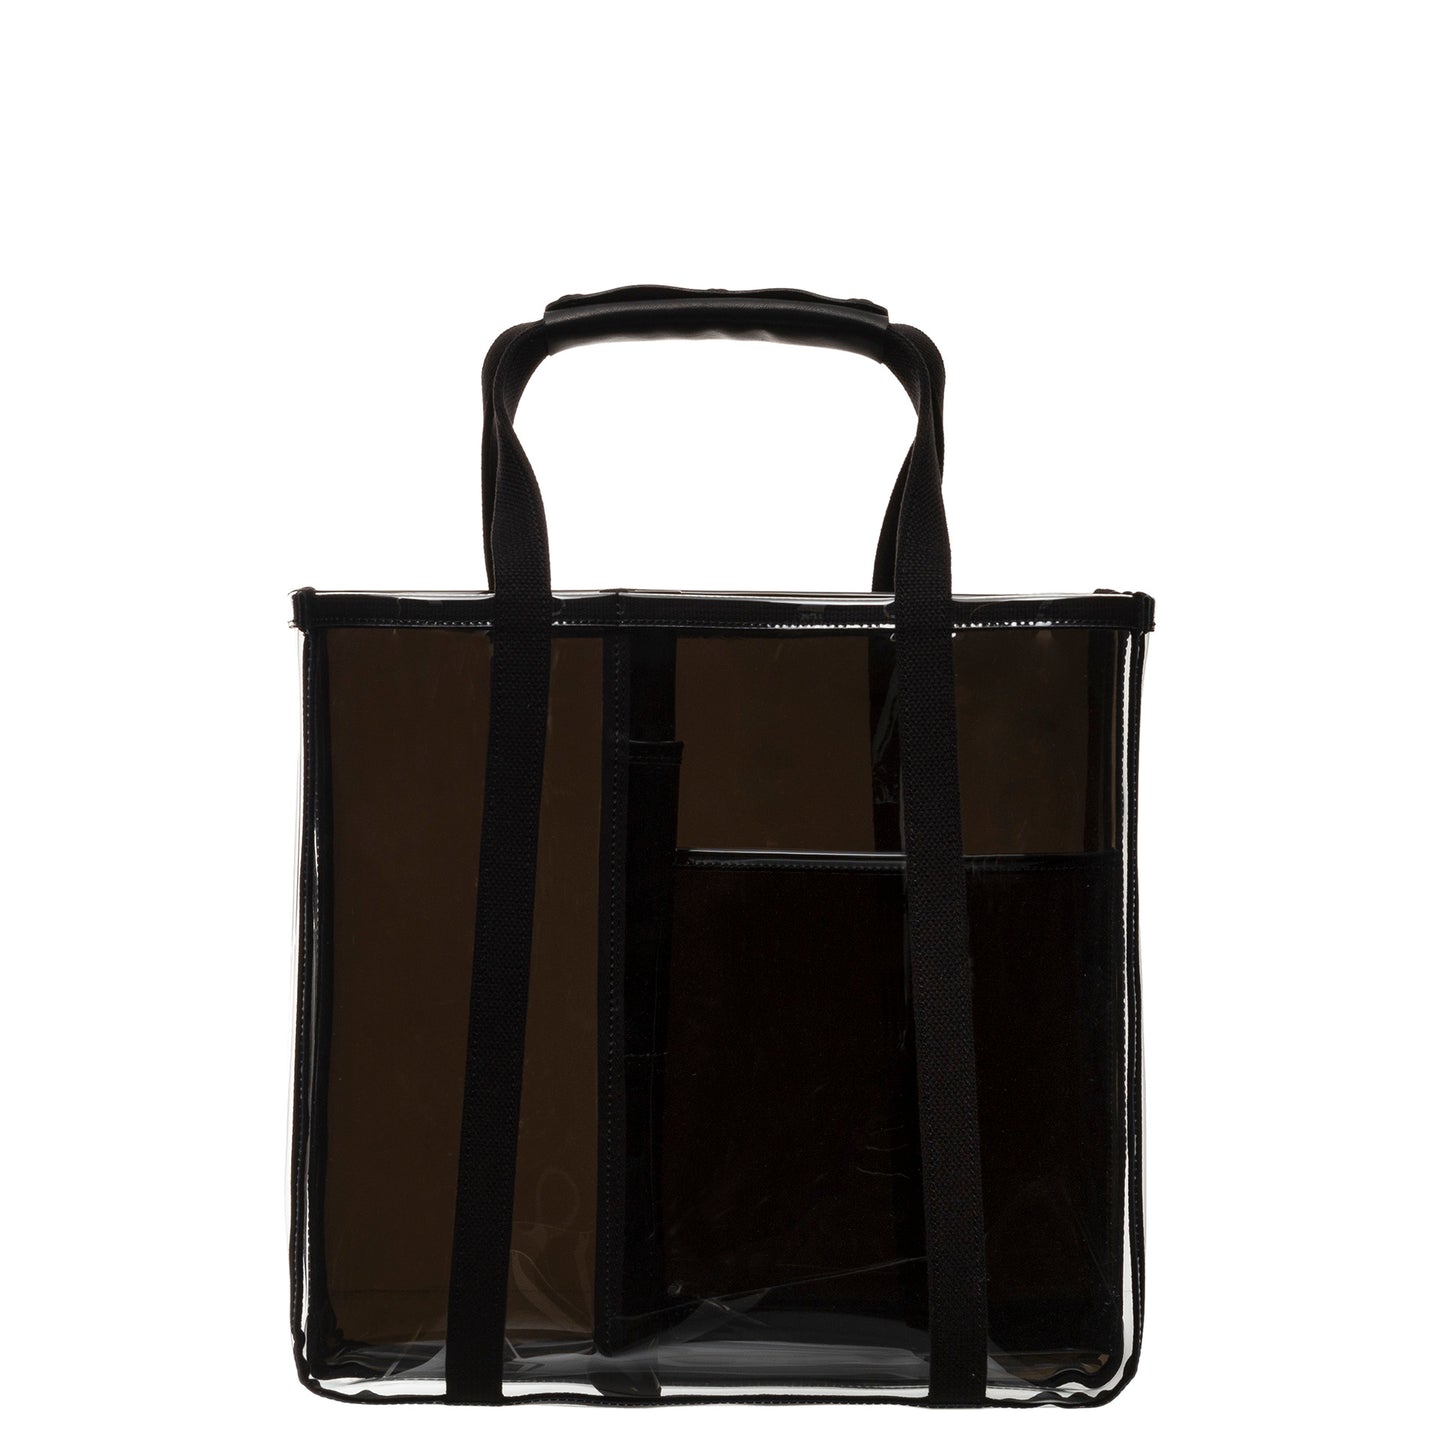 INTERNAL BLACK TOTE for DOVER STREET MARKET GINZA